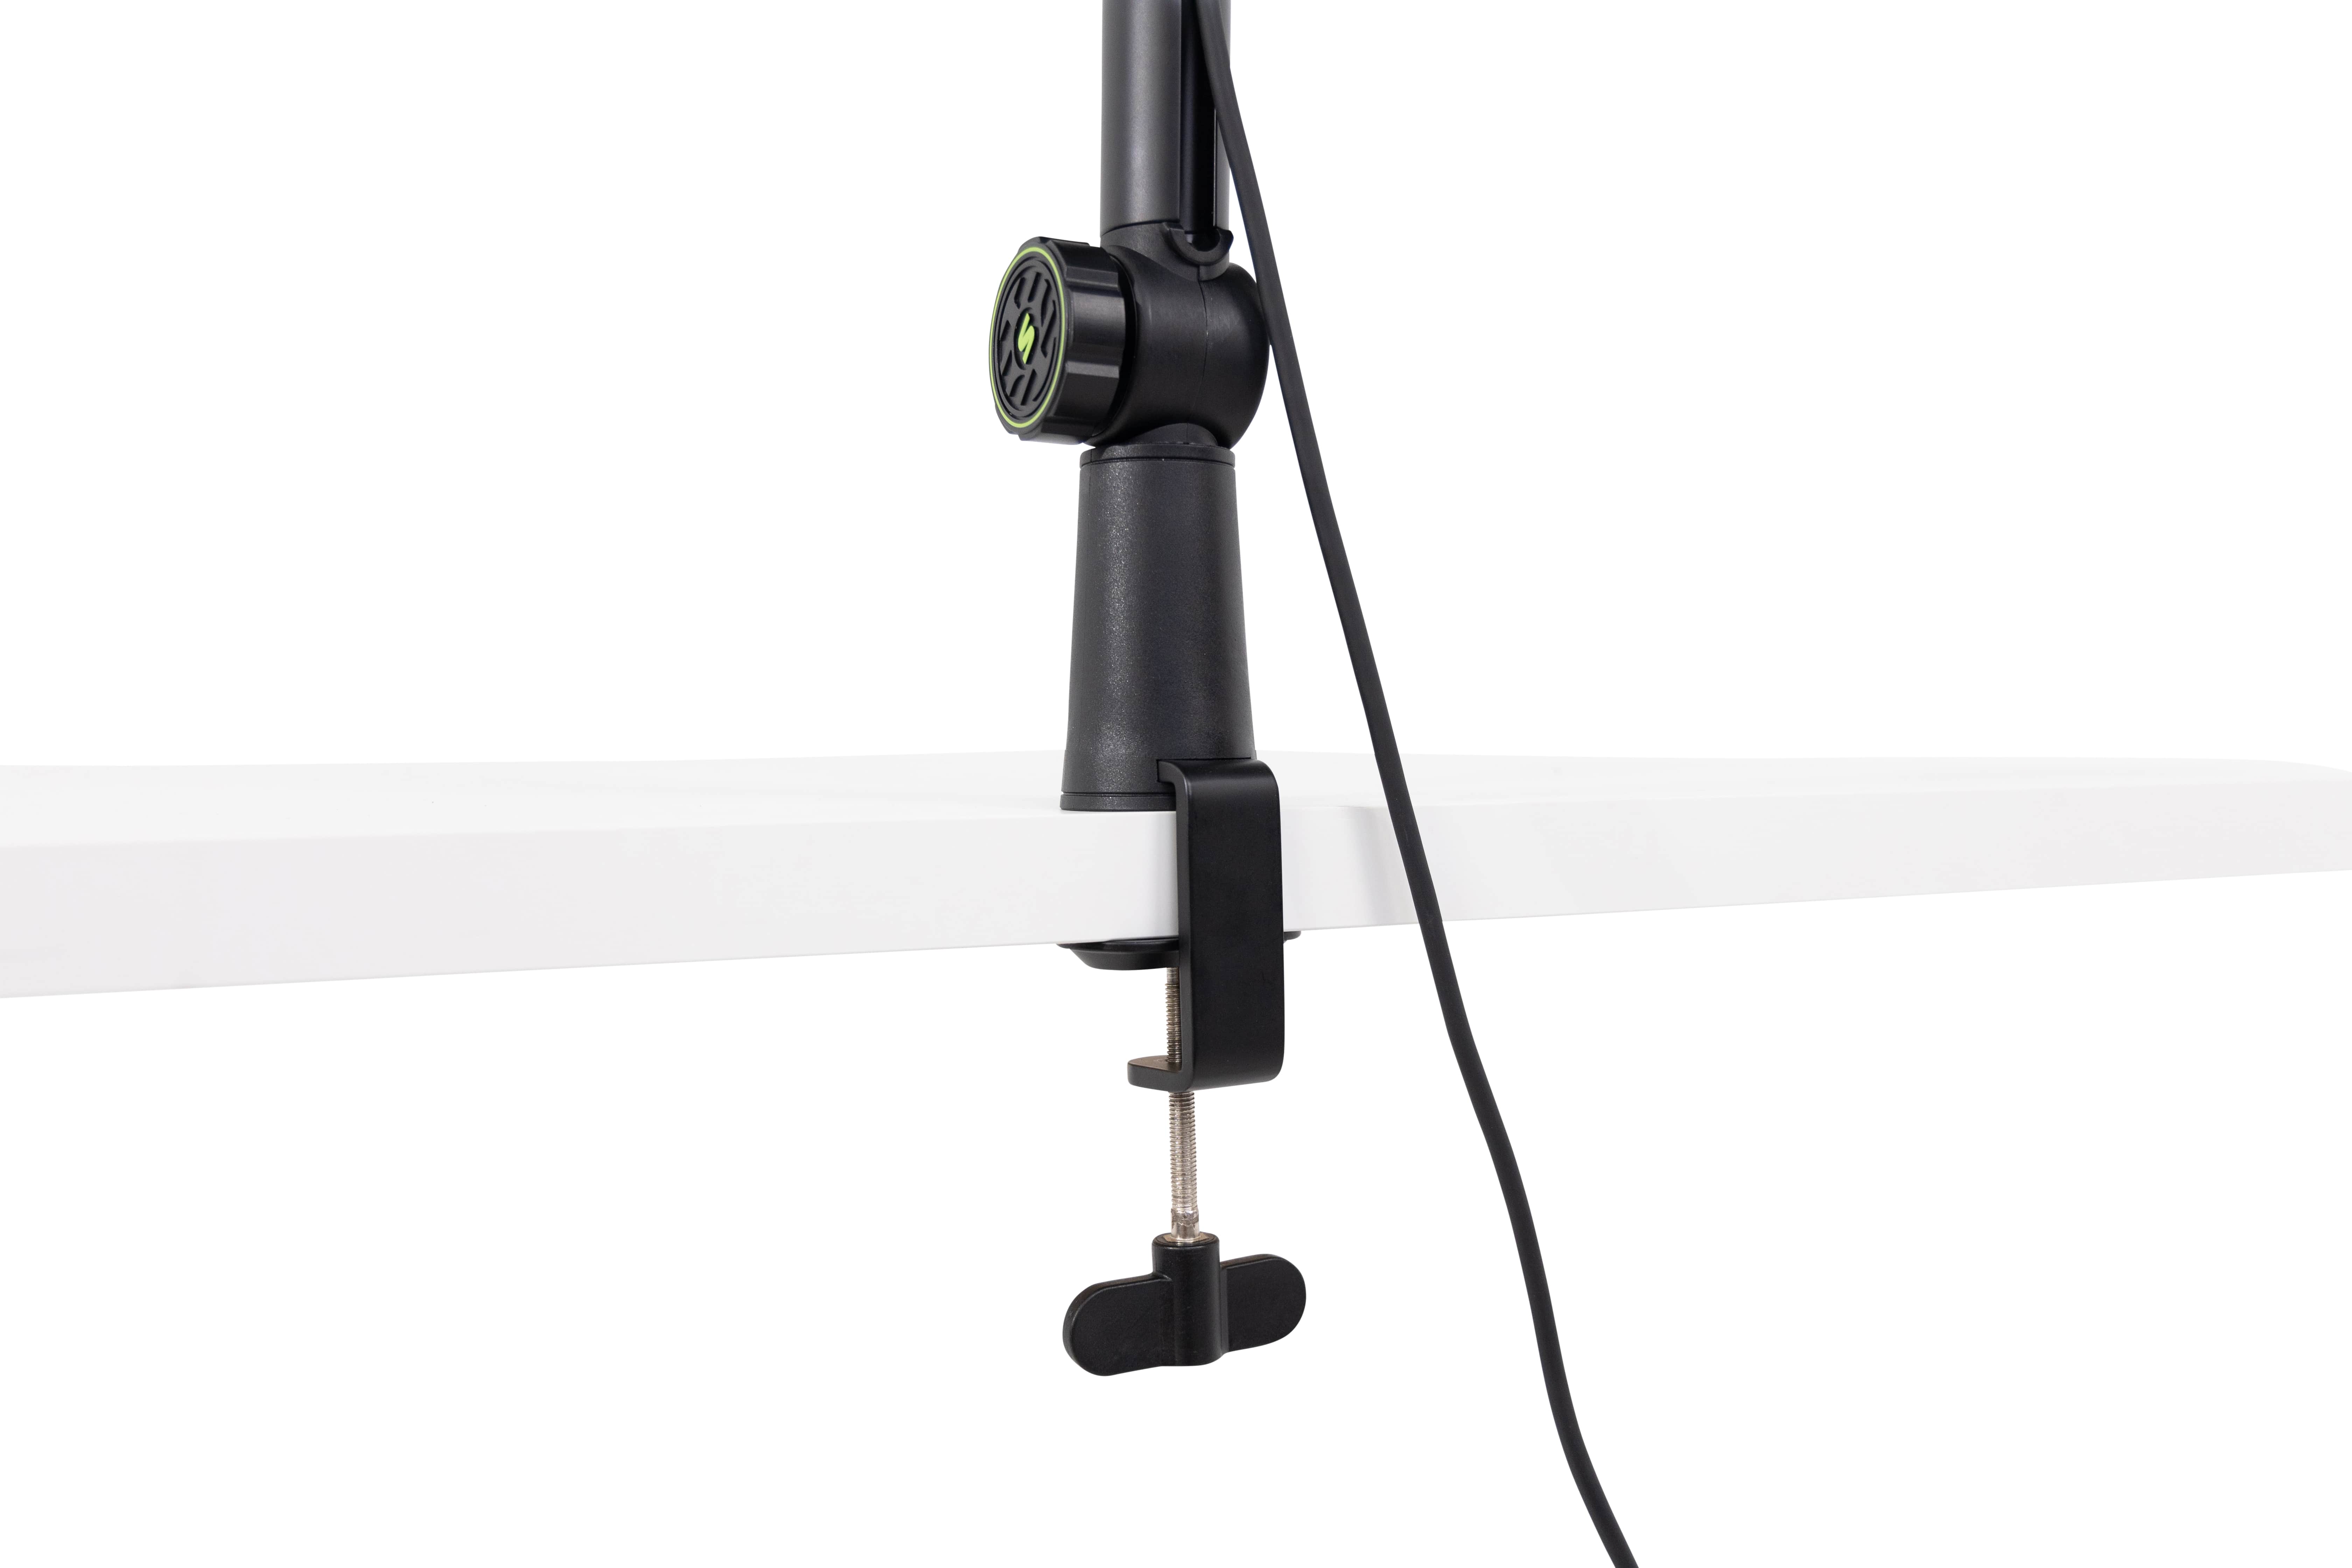 Gator Frameworks Bras Articule A Pince Deluxe Pour Micro - Microphone stand - Variation 8